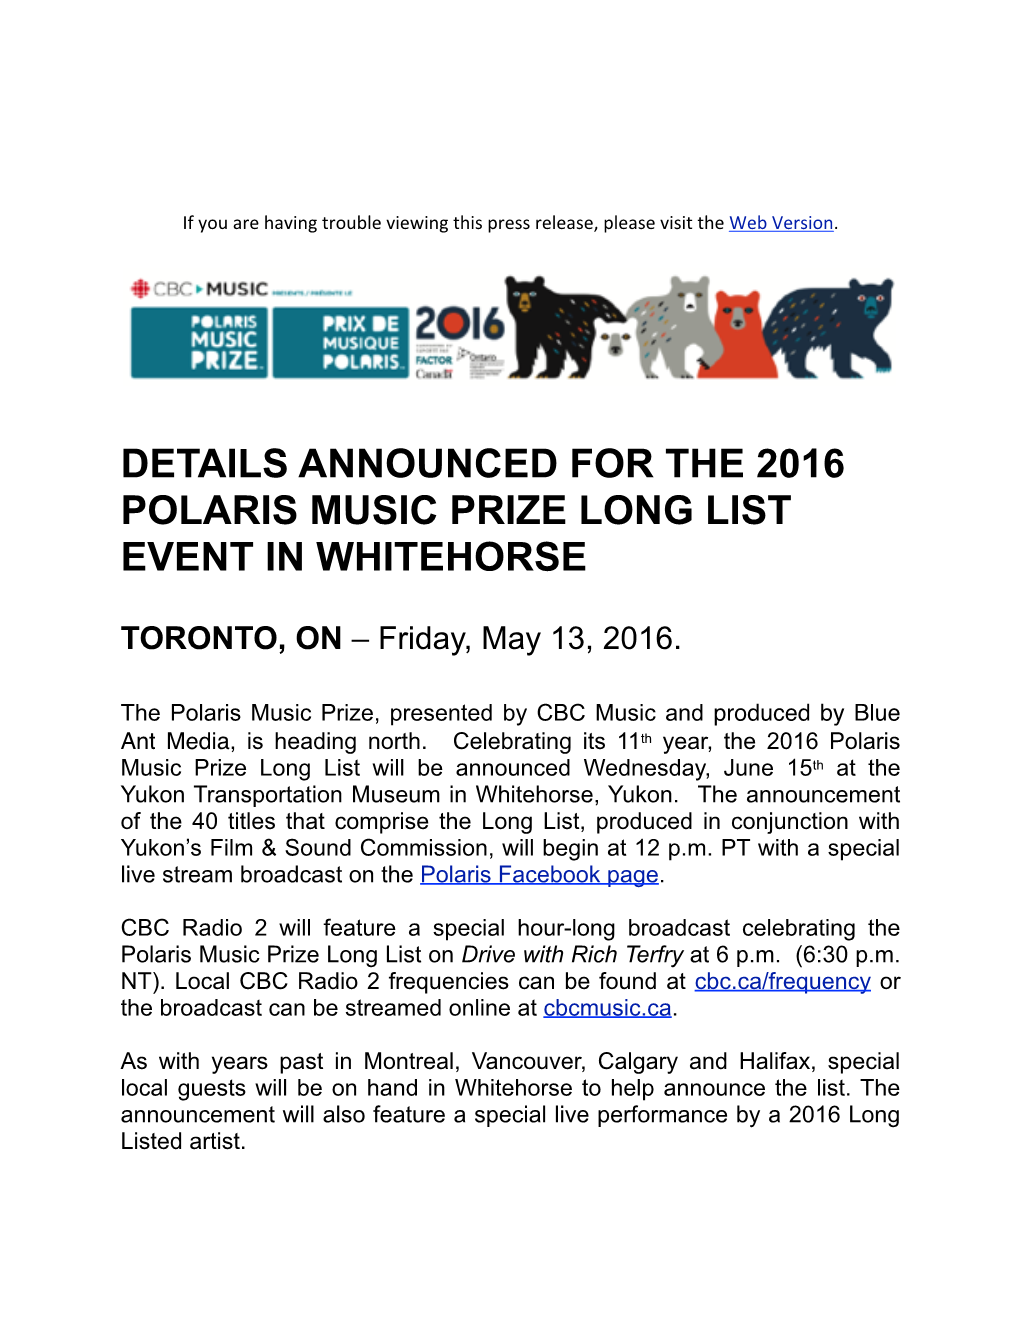 Details Announced for the 2016 Polaris Music Prize Long List Event in Whitehorse